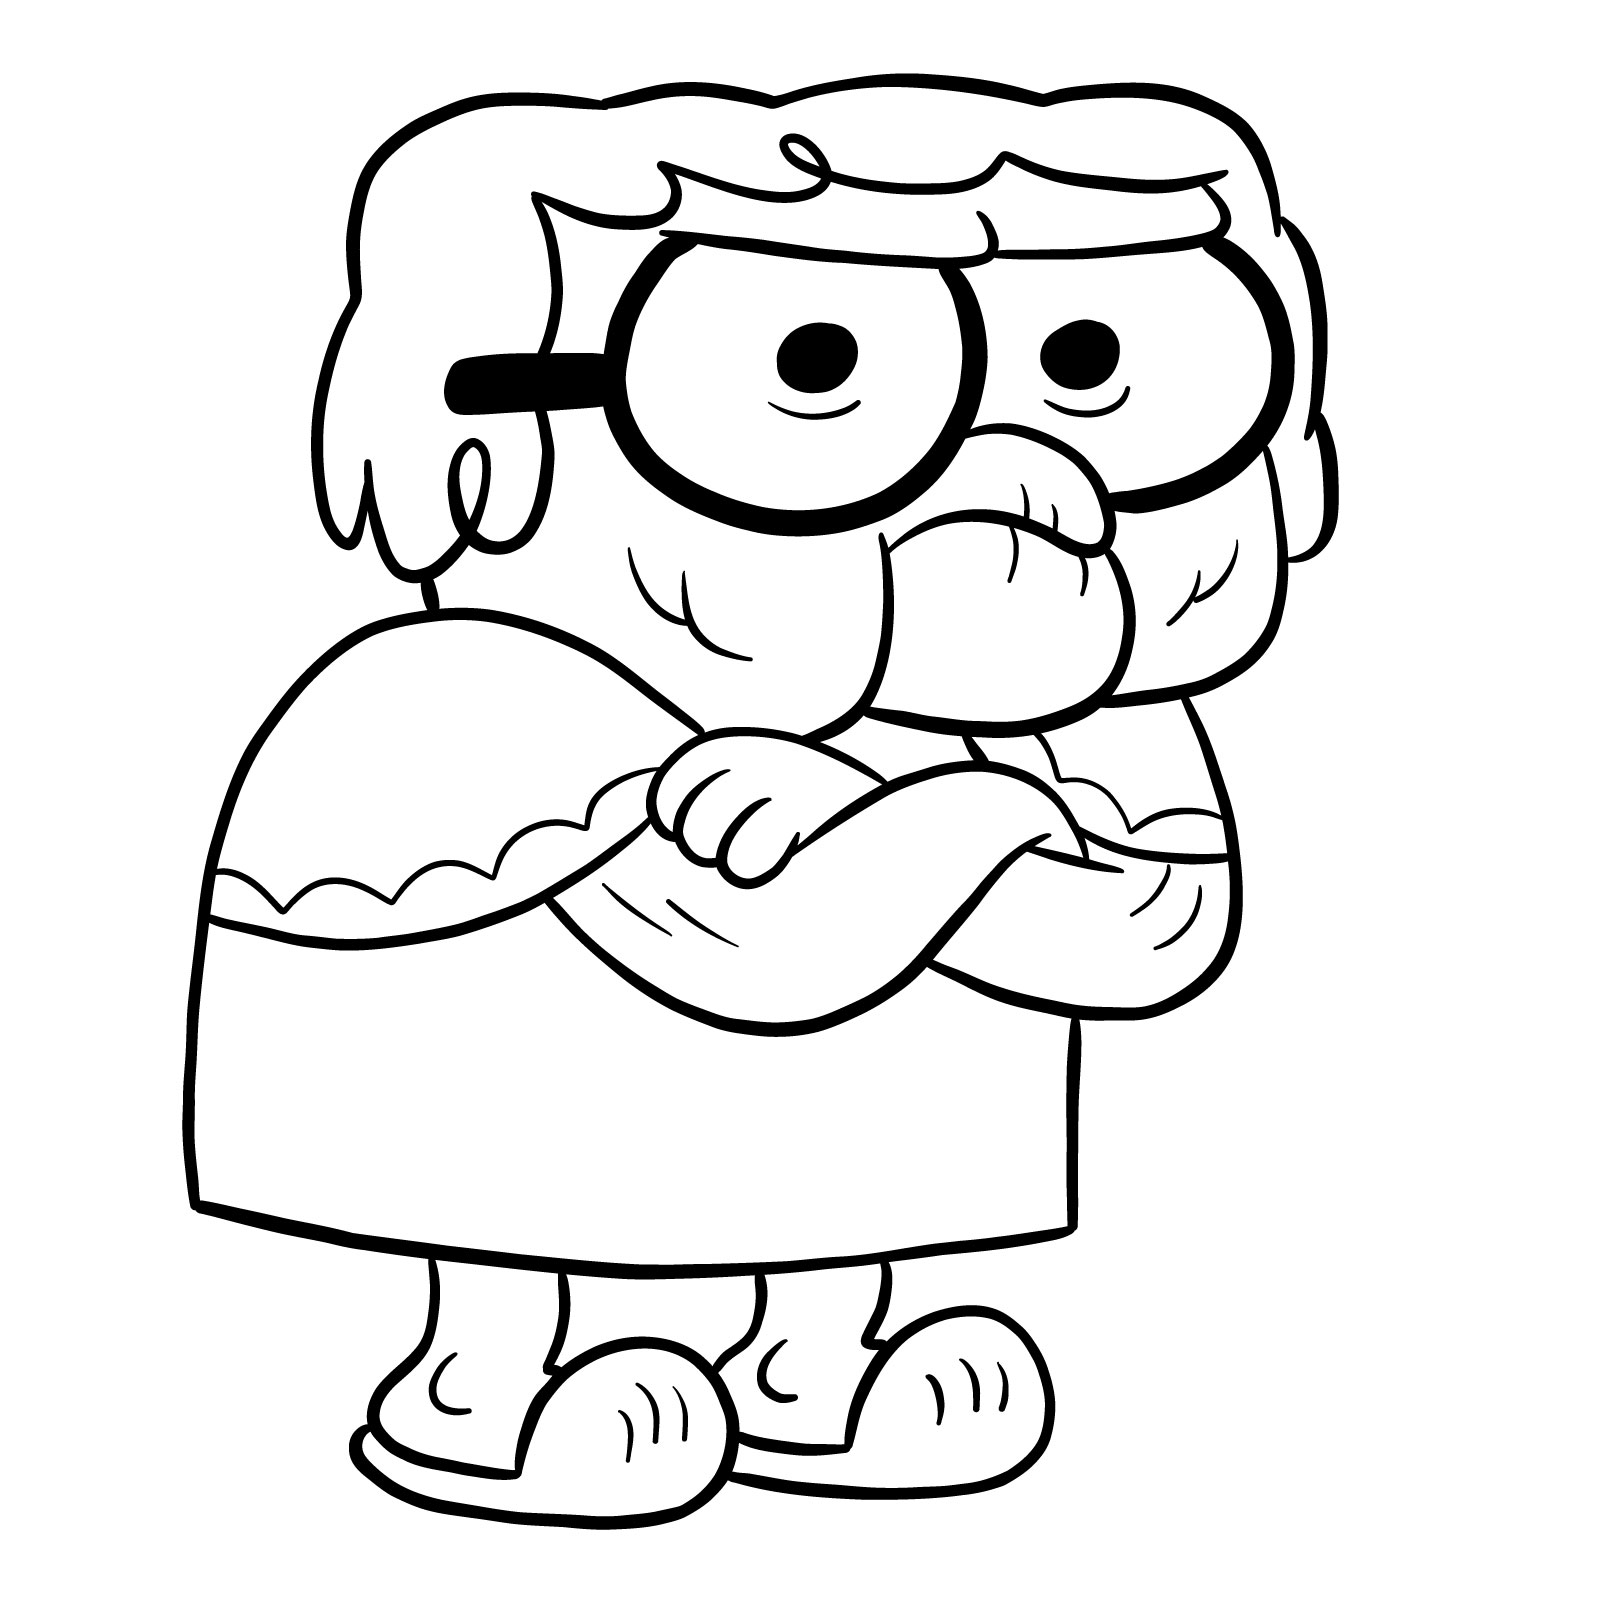 How to draw Gramma from Big City Greens - final step